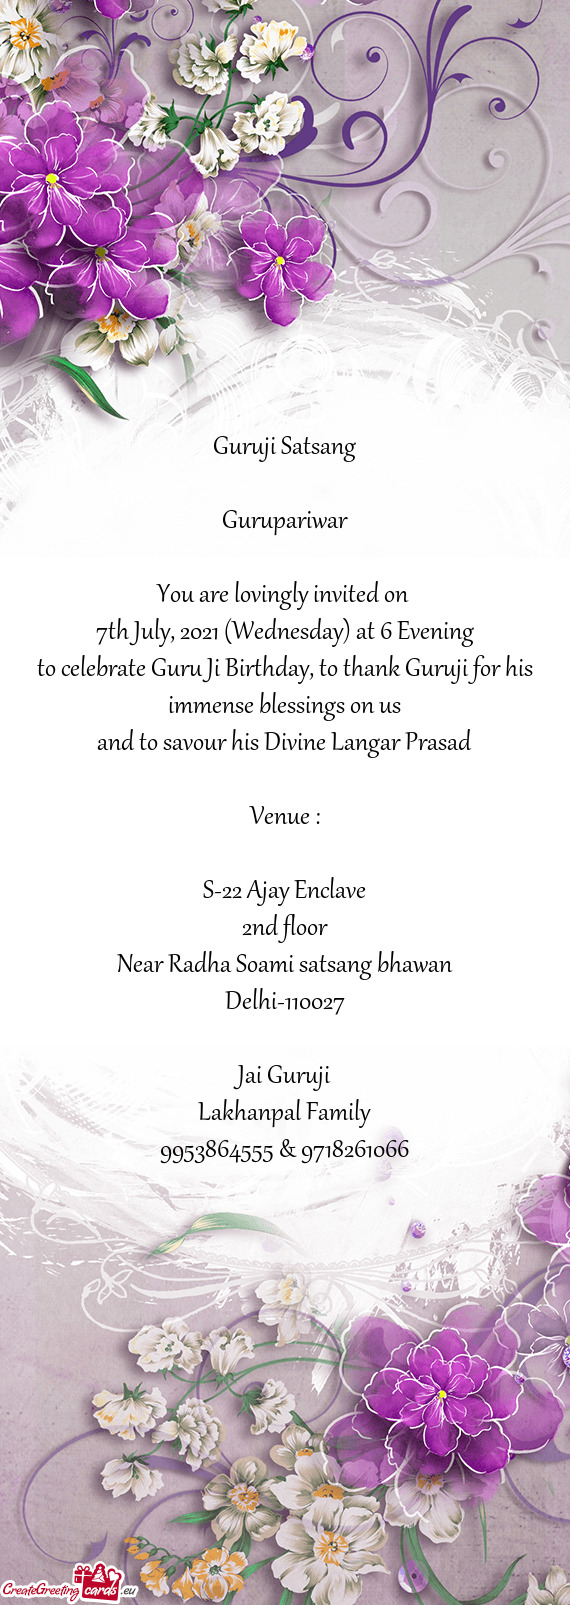 7th July, 2021 (Wednesday) at 6 Evening